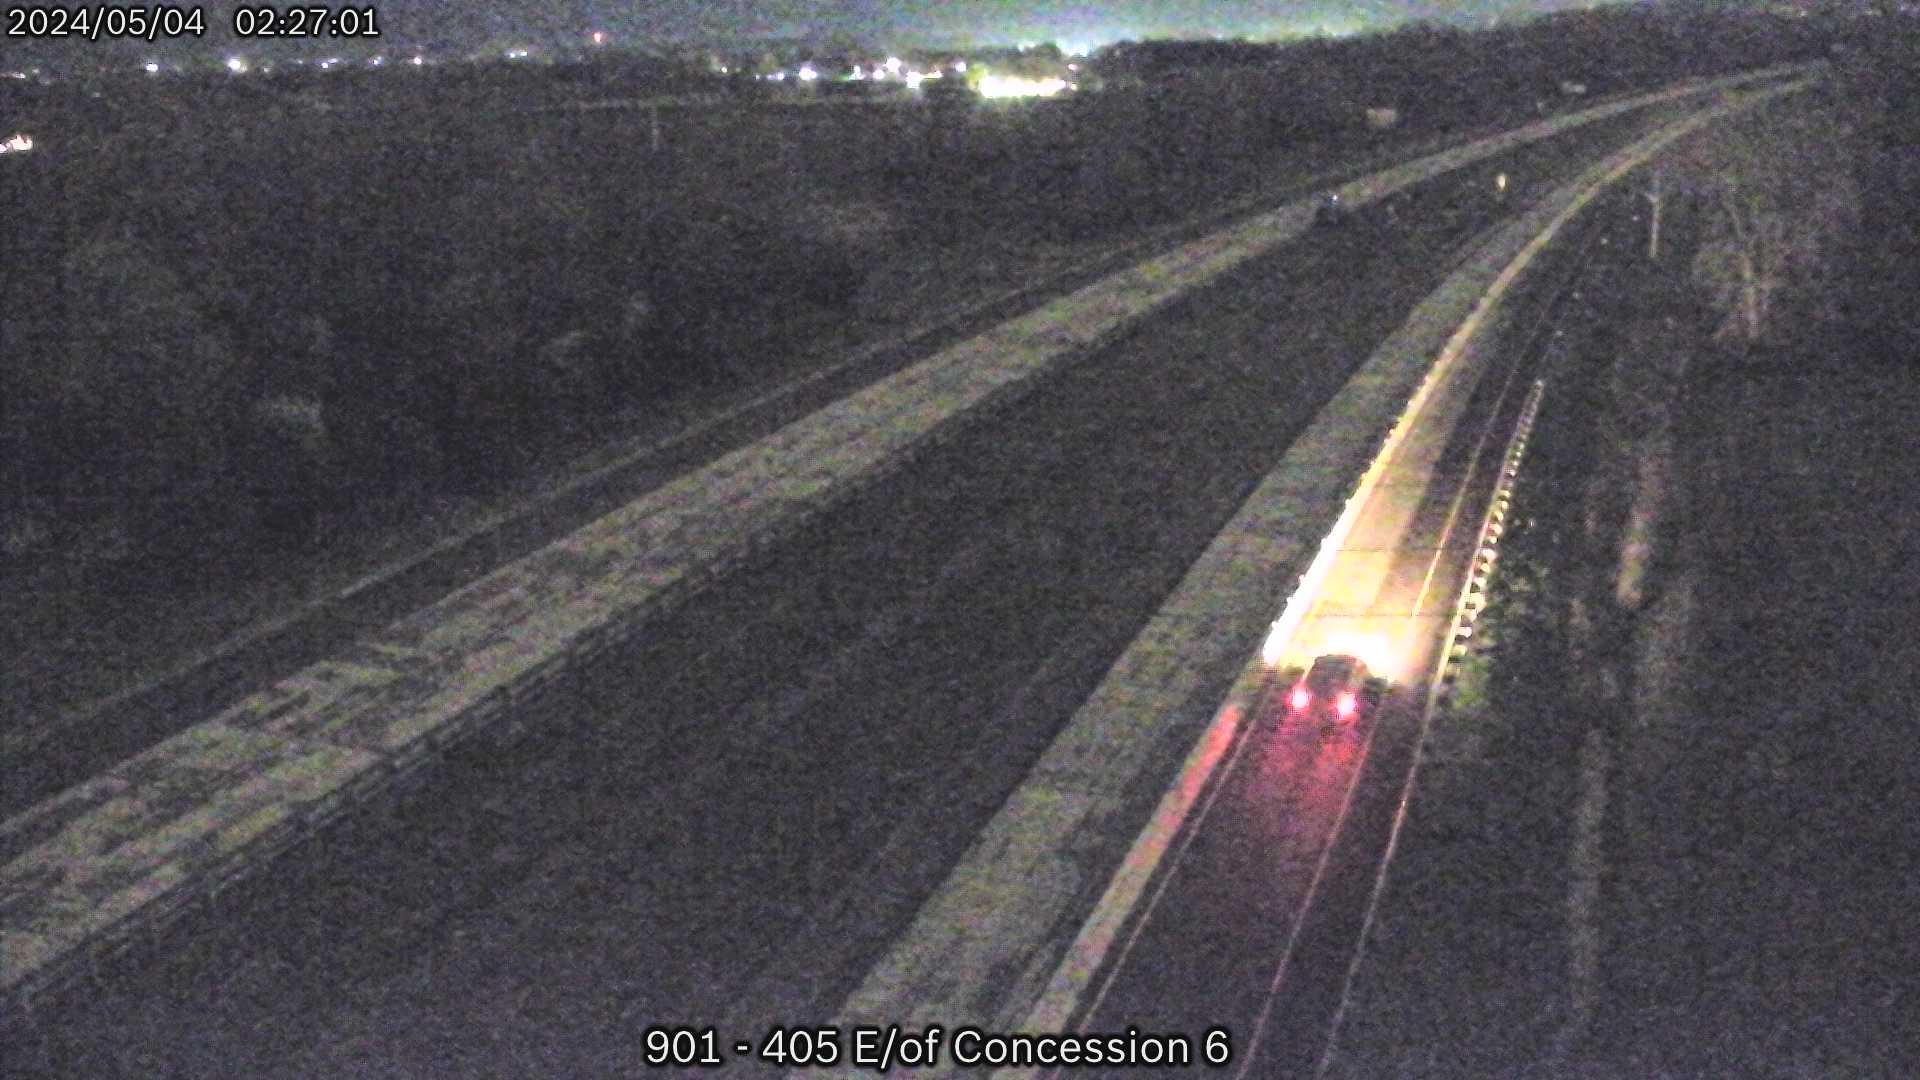 Niagara-on-the-Lake: Highway 405 East of Concession 6 Road Traffic Camera